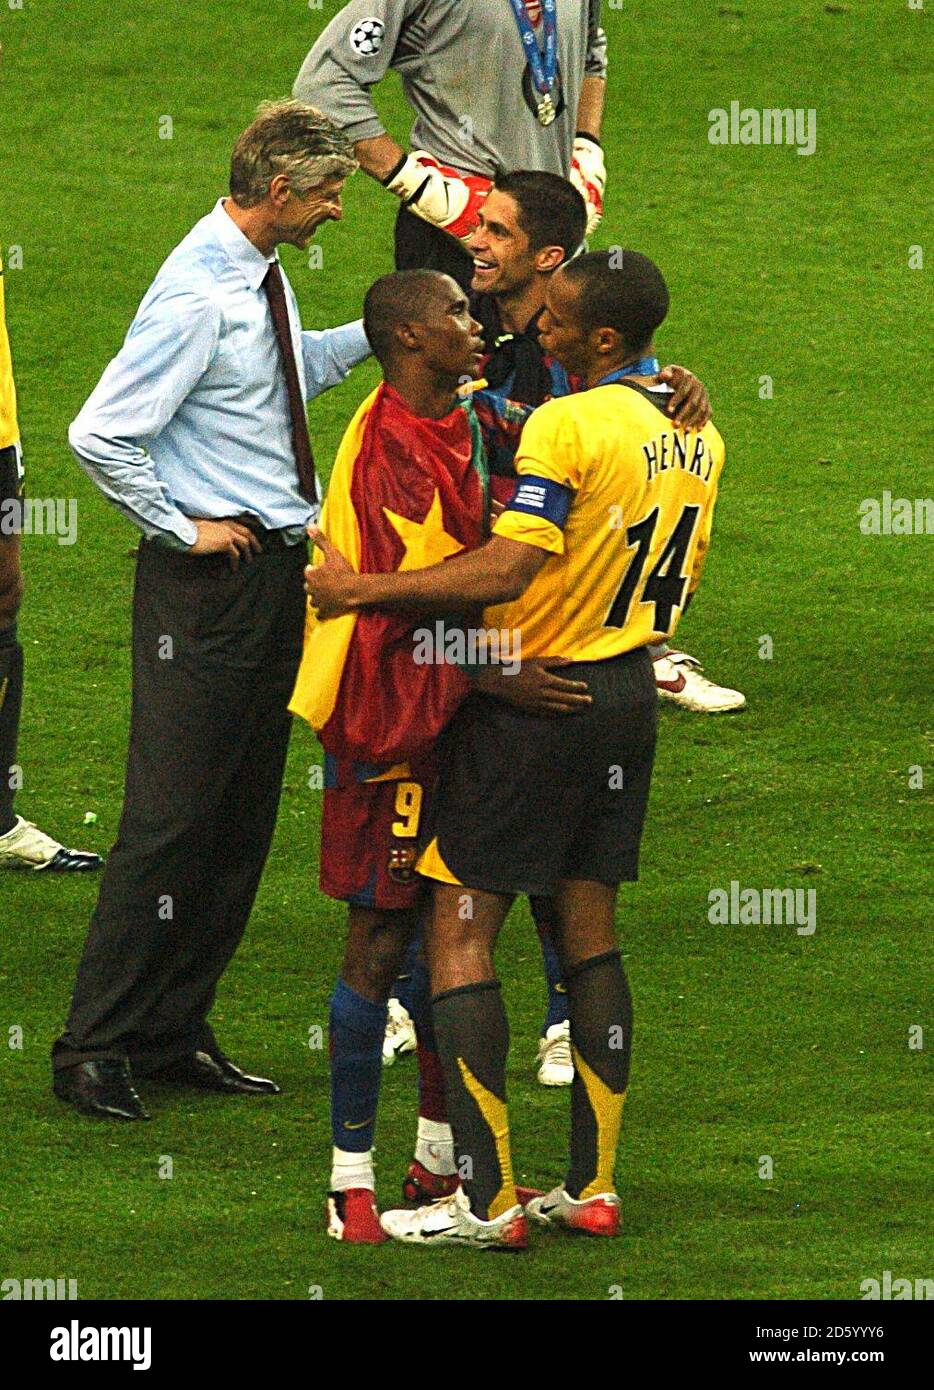 Arsenal's Thierry Henry (r) and Barcelona's Samuel Eto'o (l) embrace after the game Stock Photo